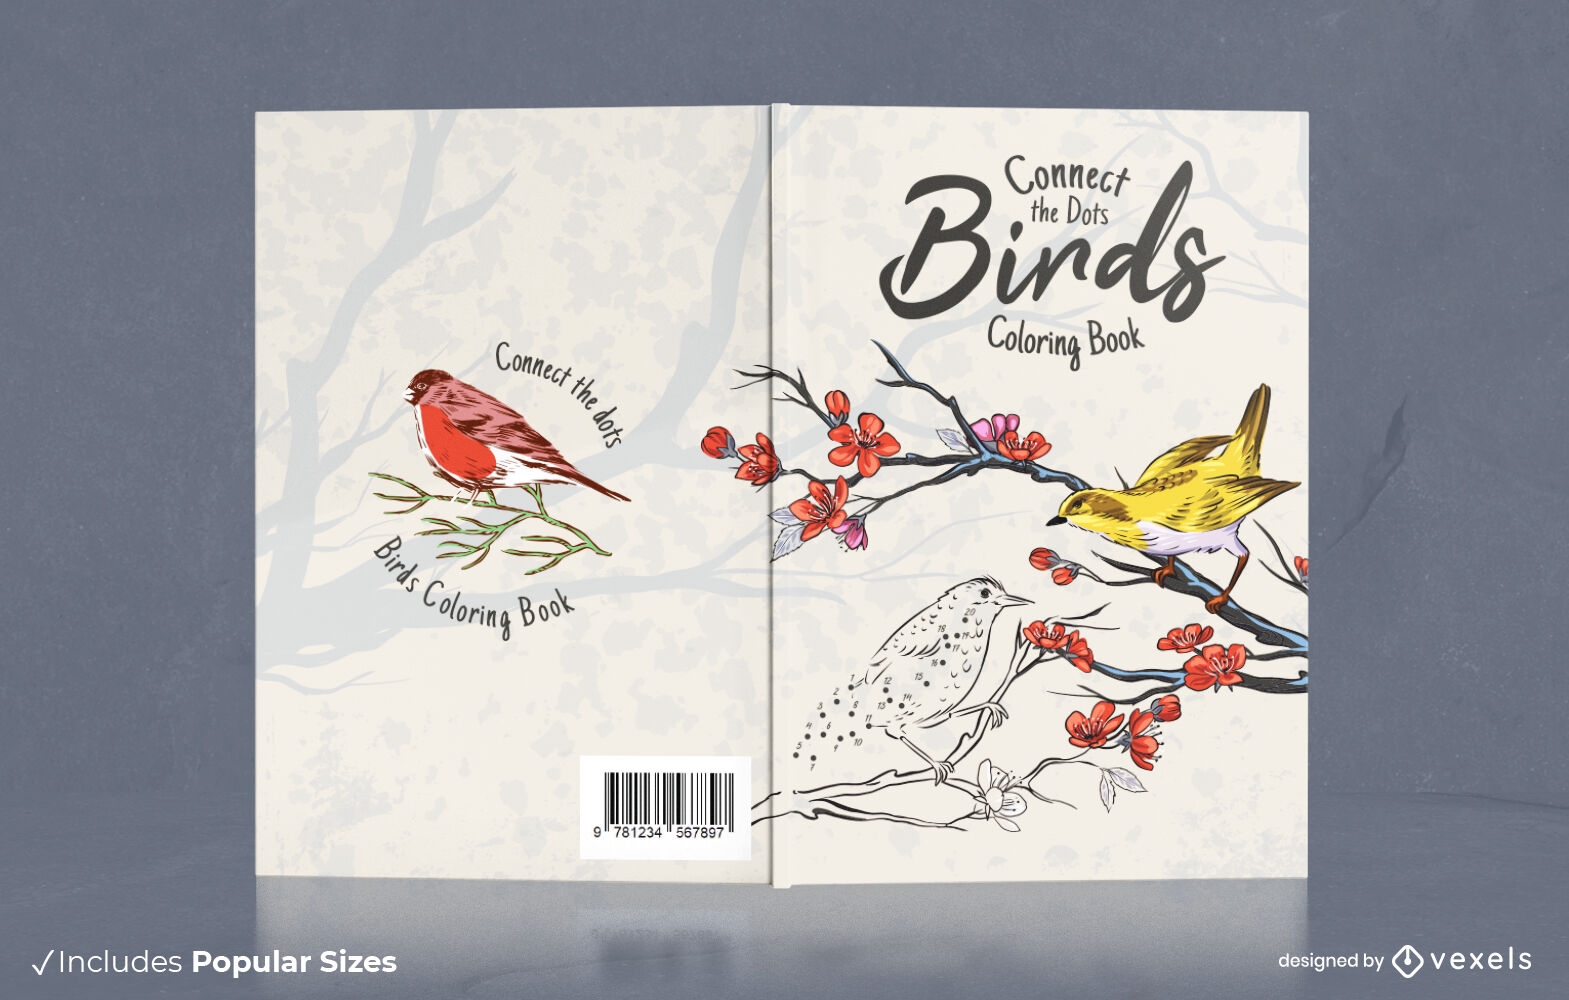 Connect the dots birds coloring book cover design